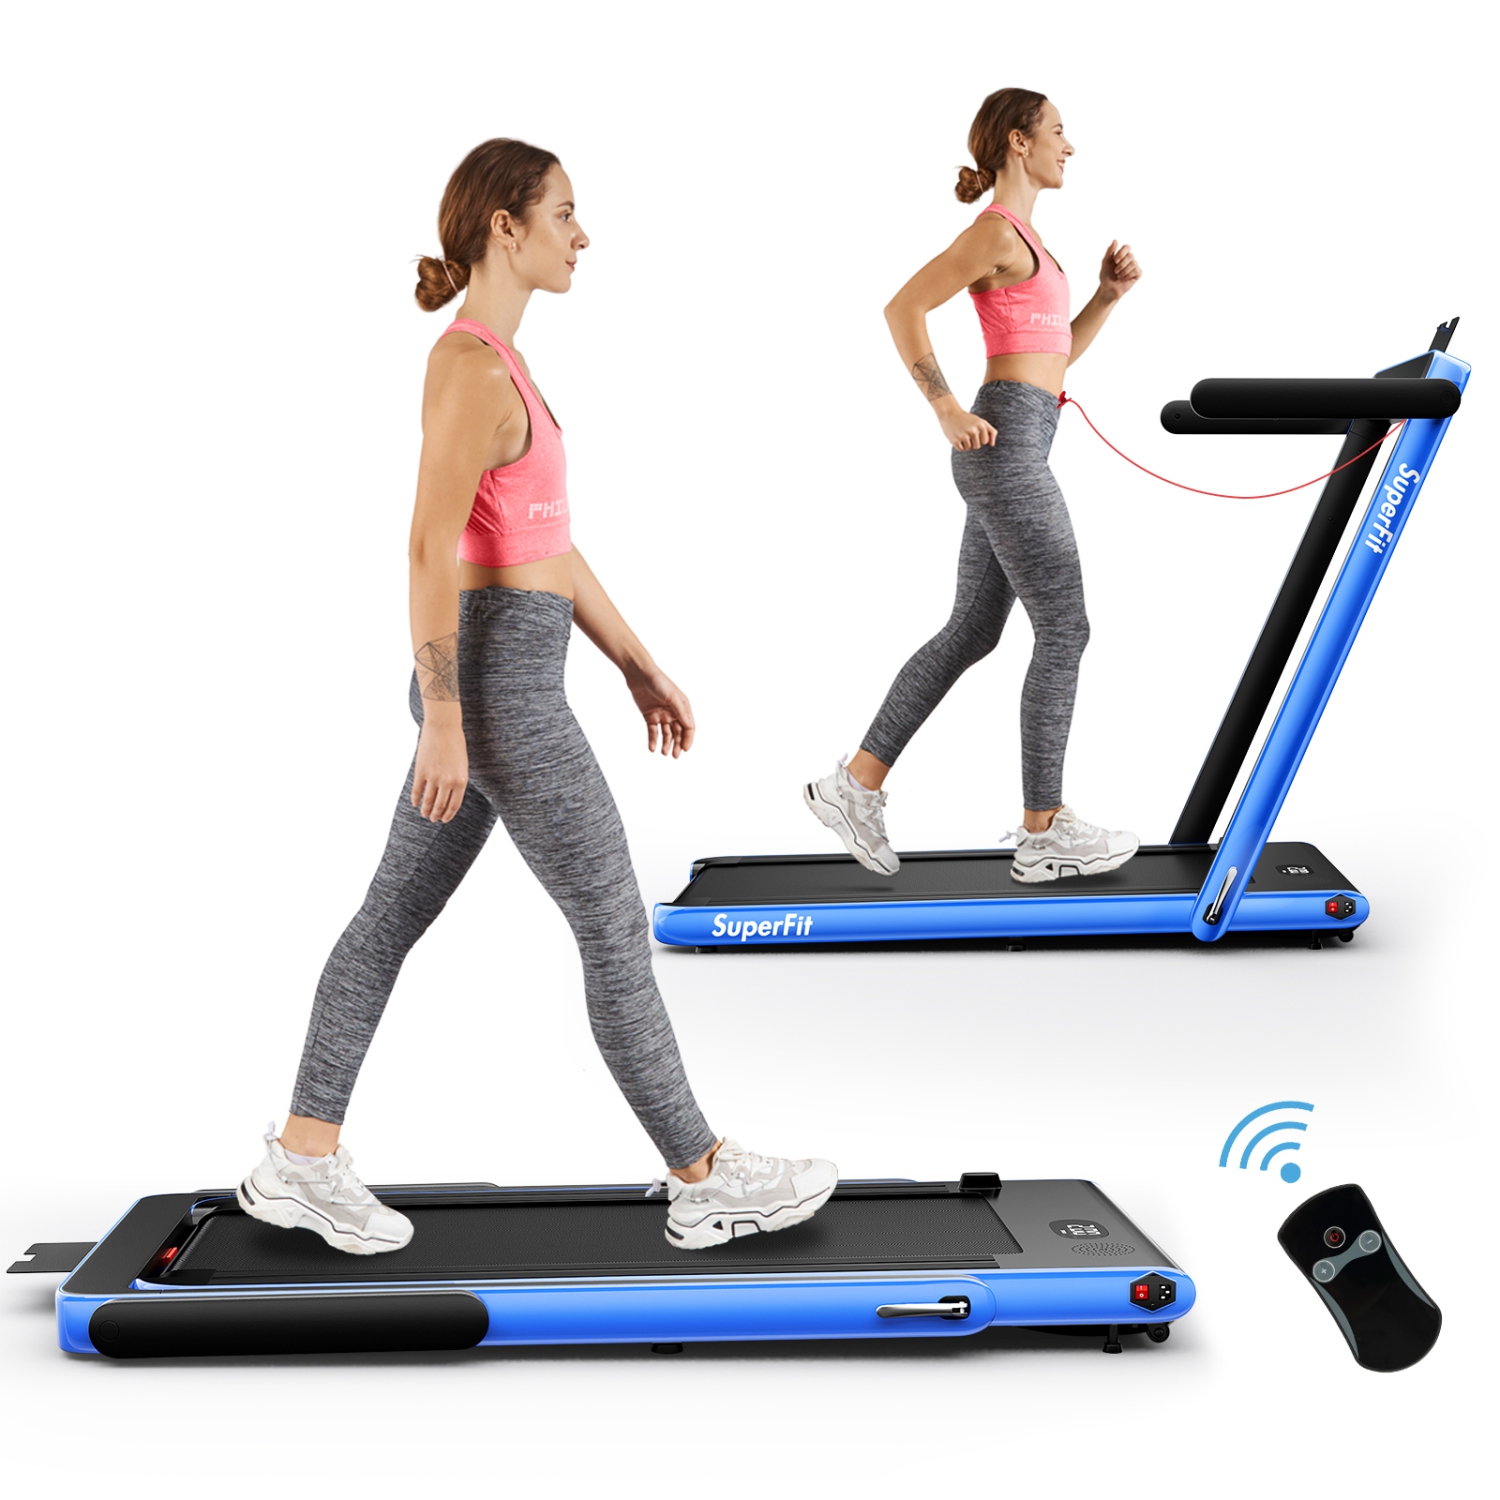 Superfit 2.25HP 2 in 1 Folding Treadmill / Walking Pad With Bluetooth Speaker and Remote Control - Blue